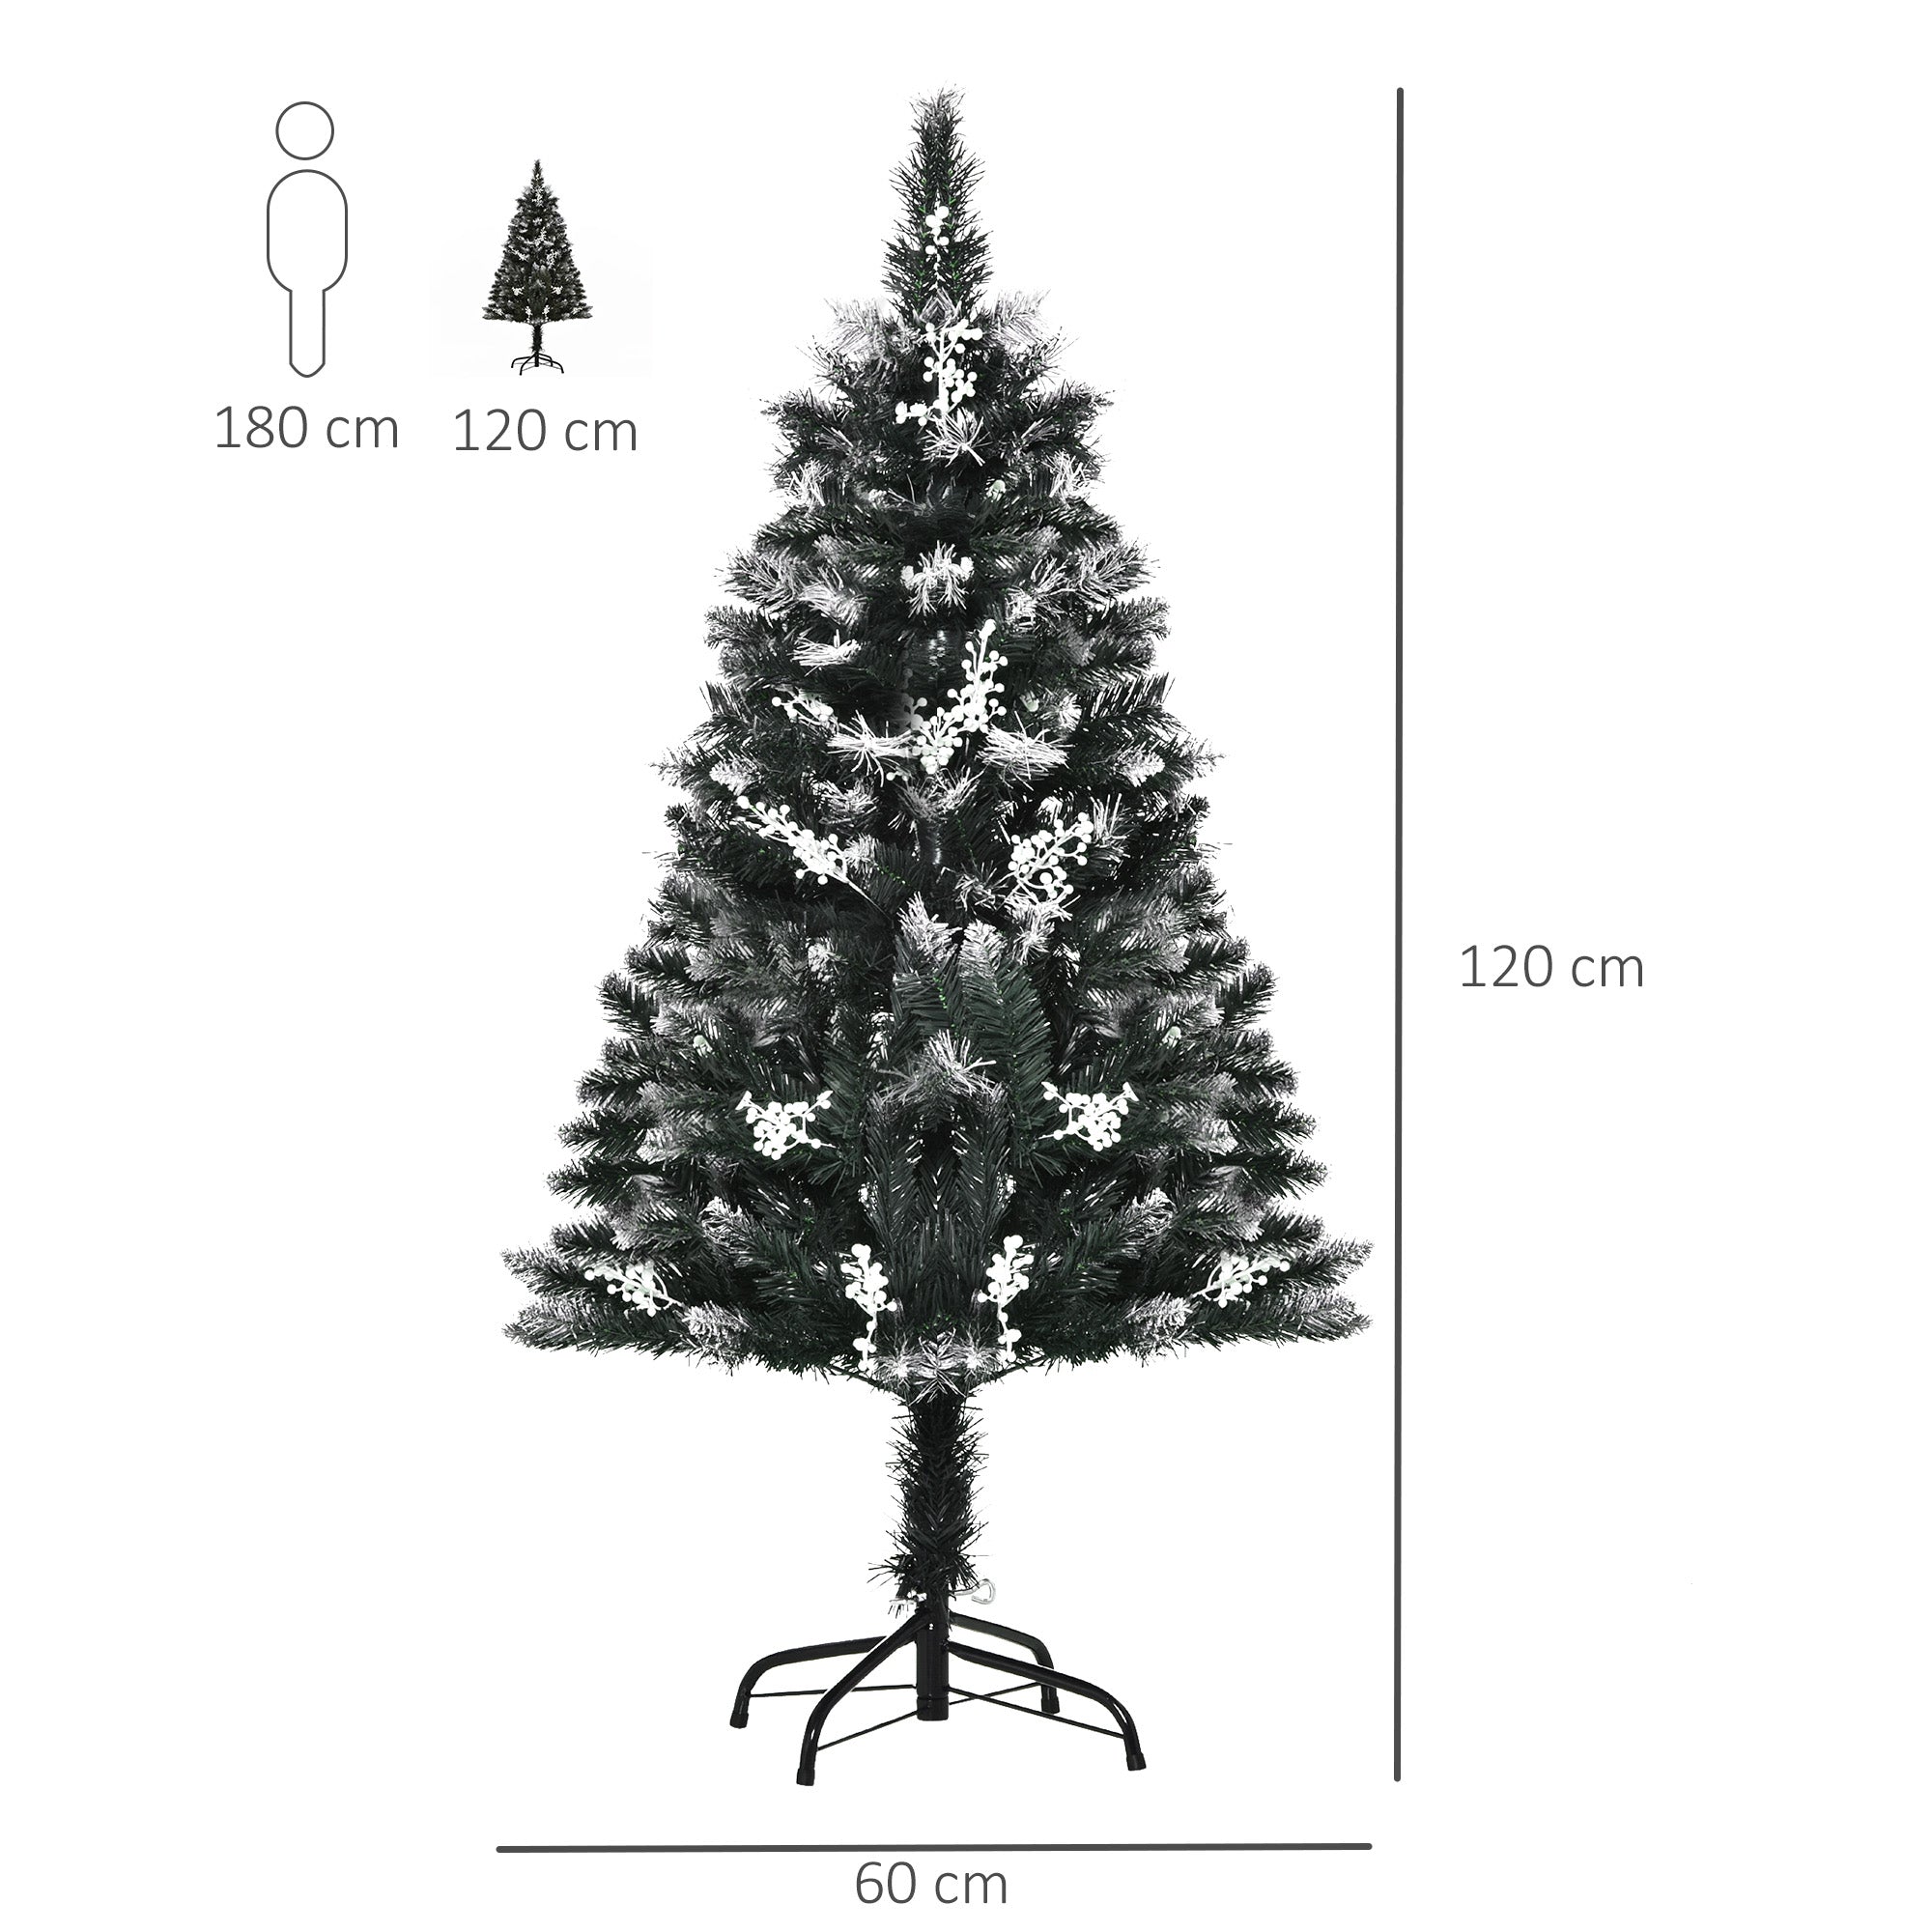 HOMCOM 4ft Artificial Snow Dipped Christmas Tree Xmas Pencil Tree Holiday Home Indoor Decoration with Foldable Feet White Berries Dark Green - Inspirely